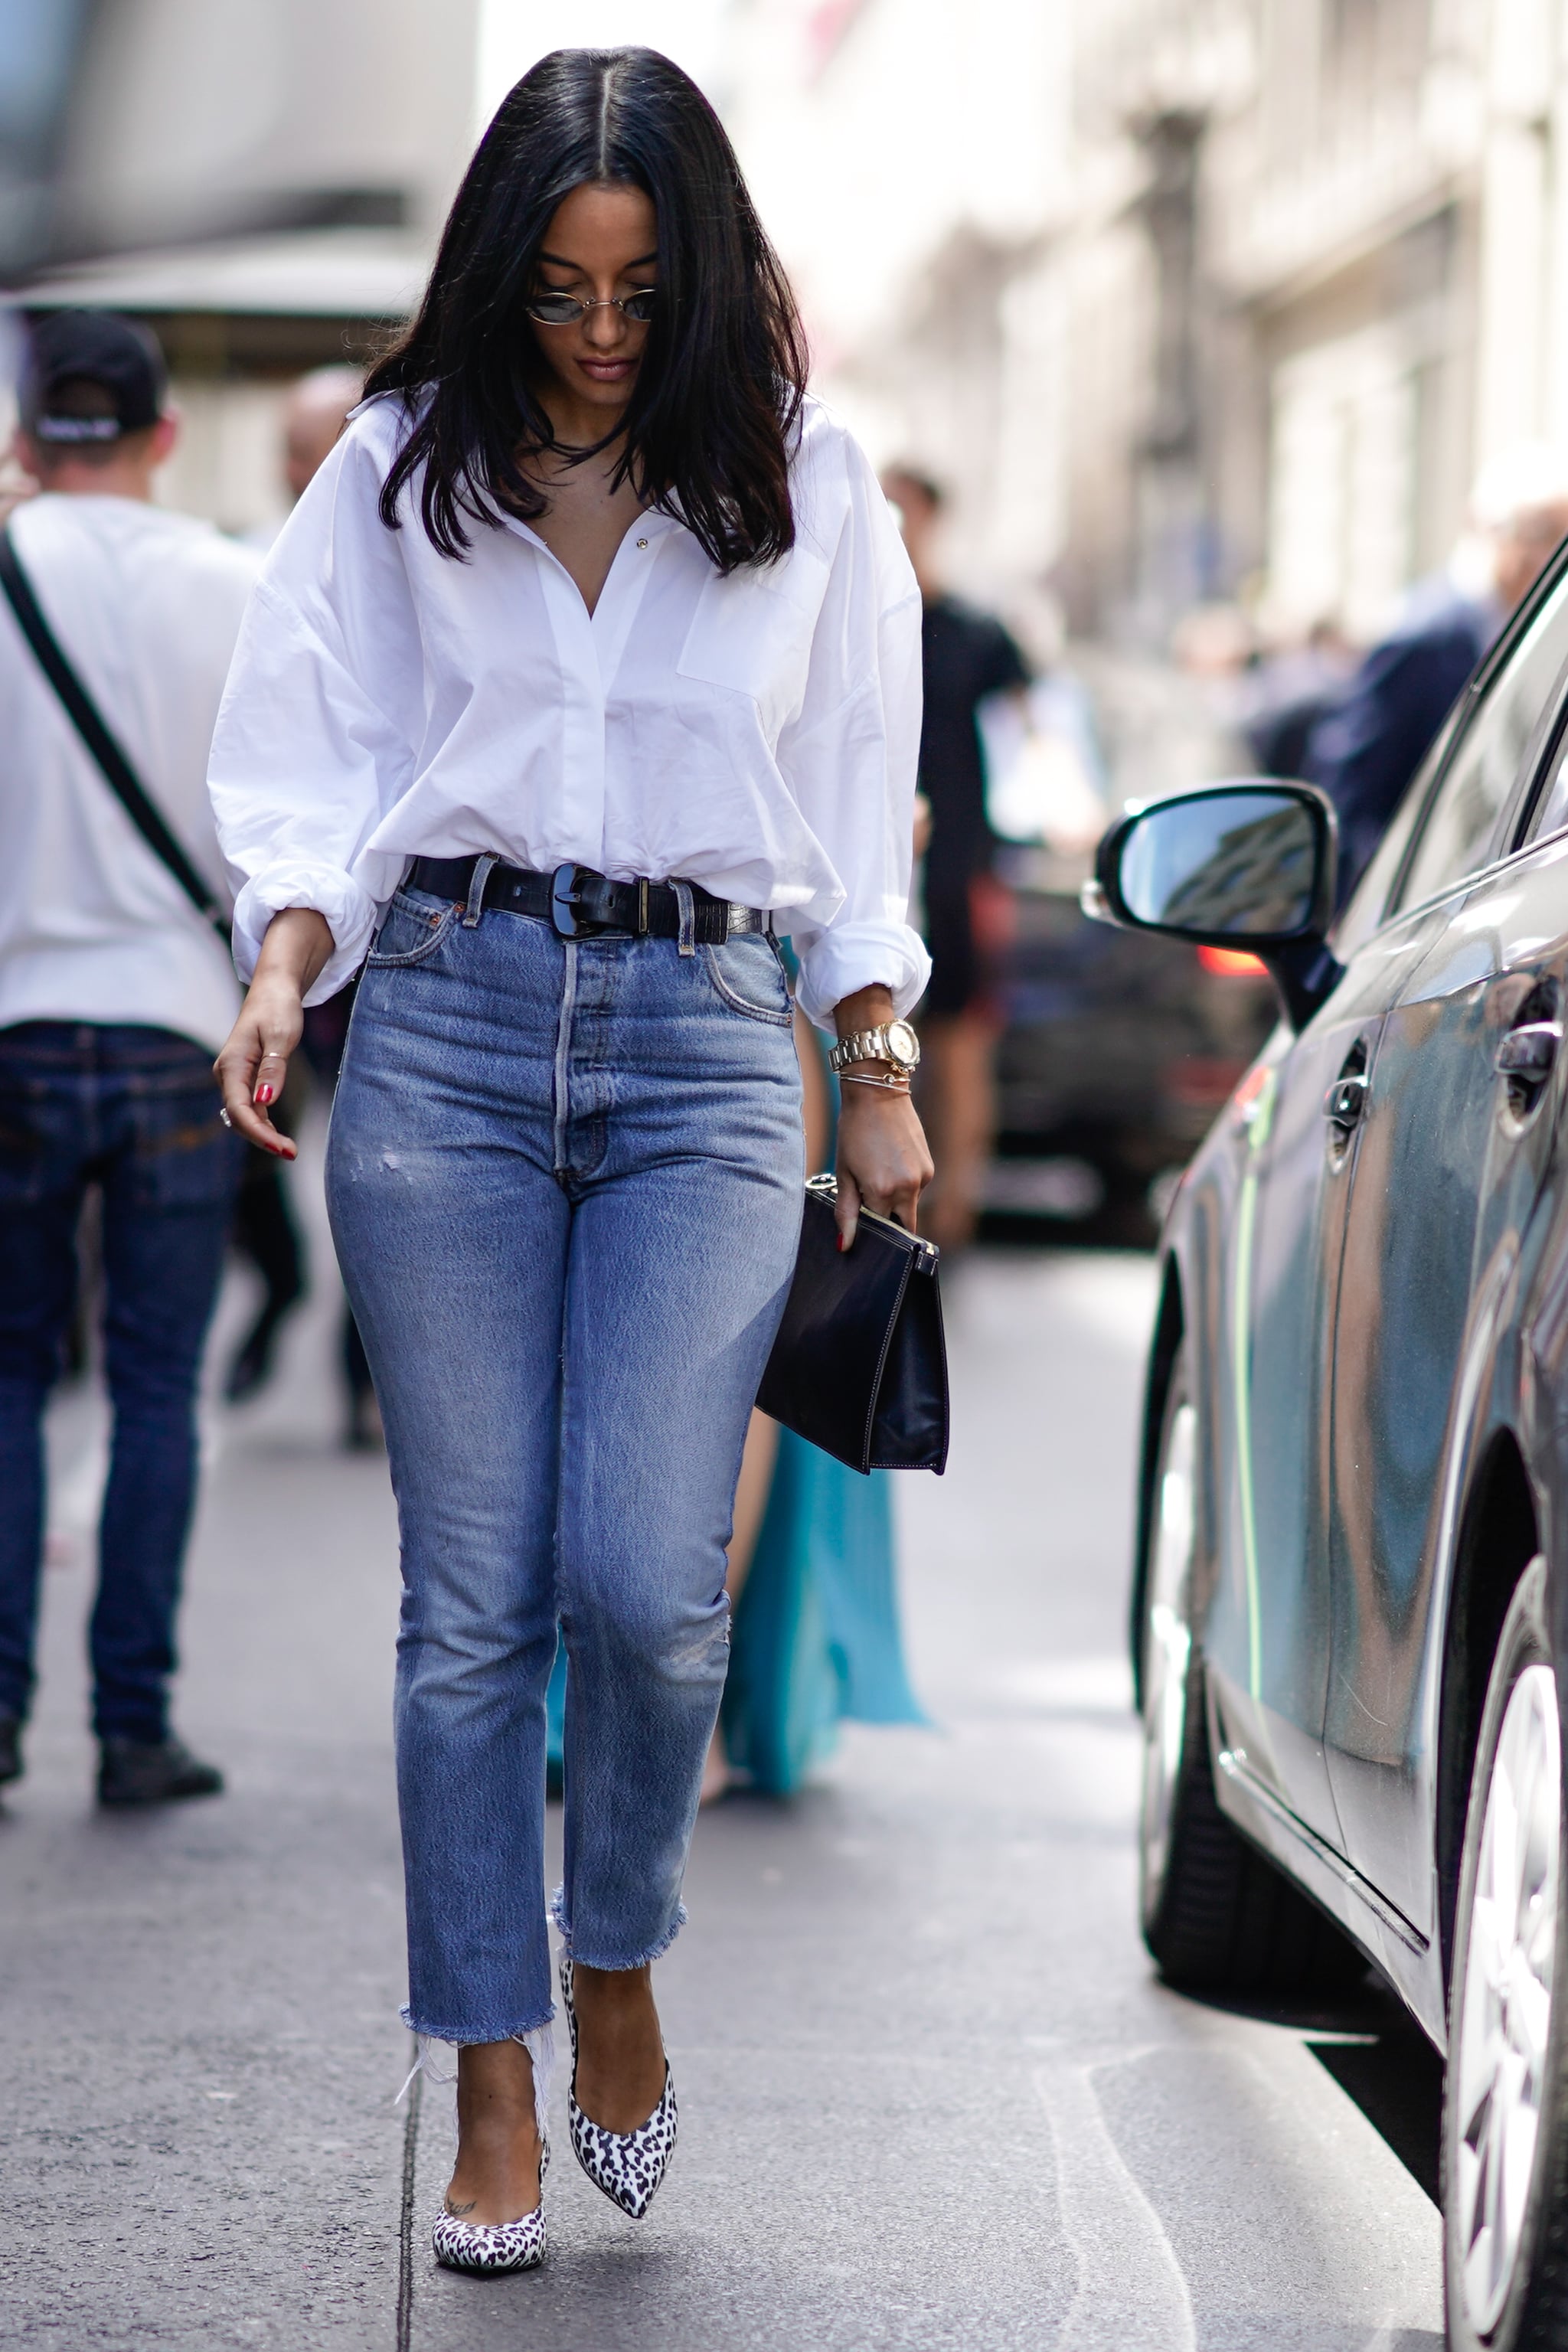 Best Ways To Style Your White Button Up And Down Shirt